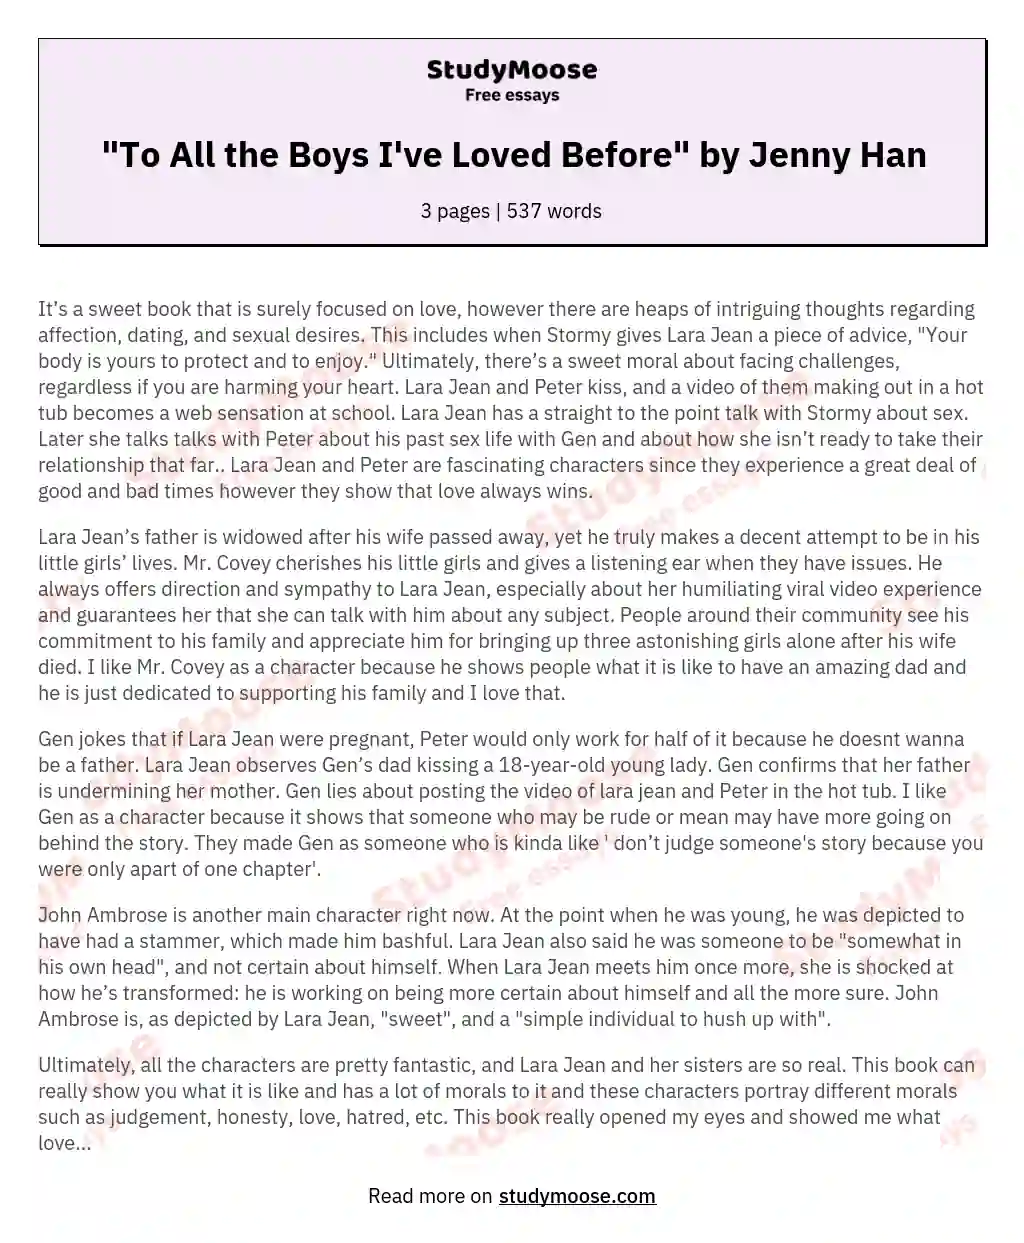 "To All the Boys I've Loved Before" by Jenny Han